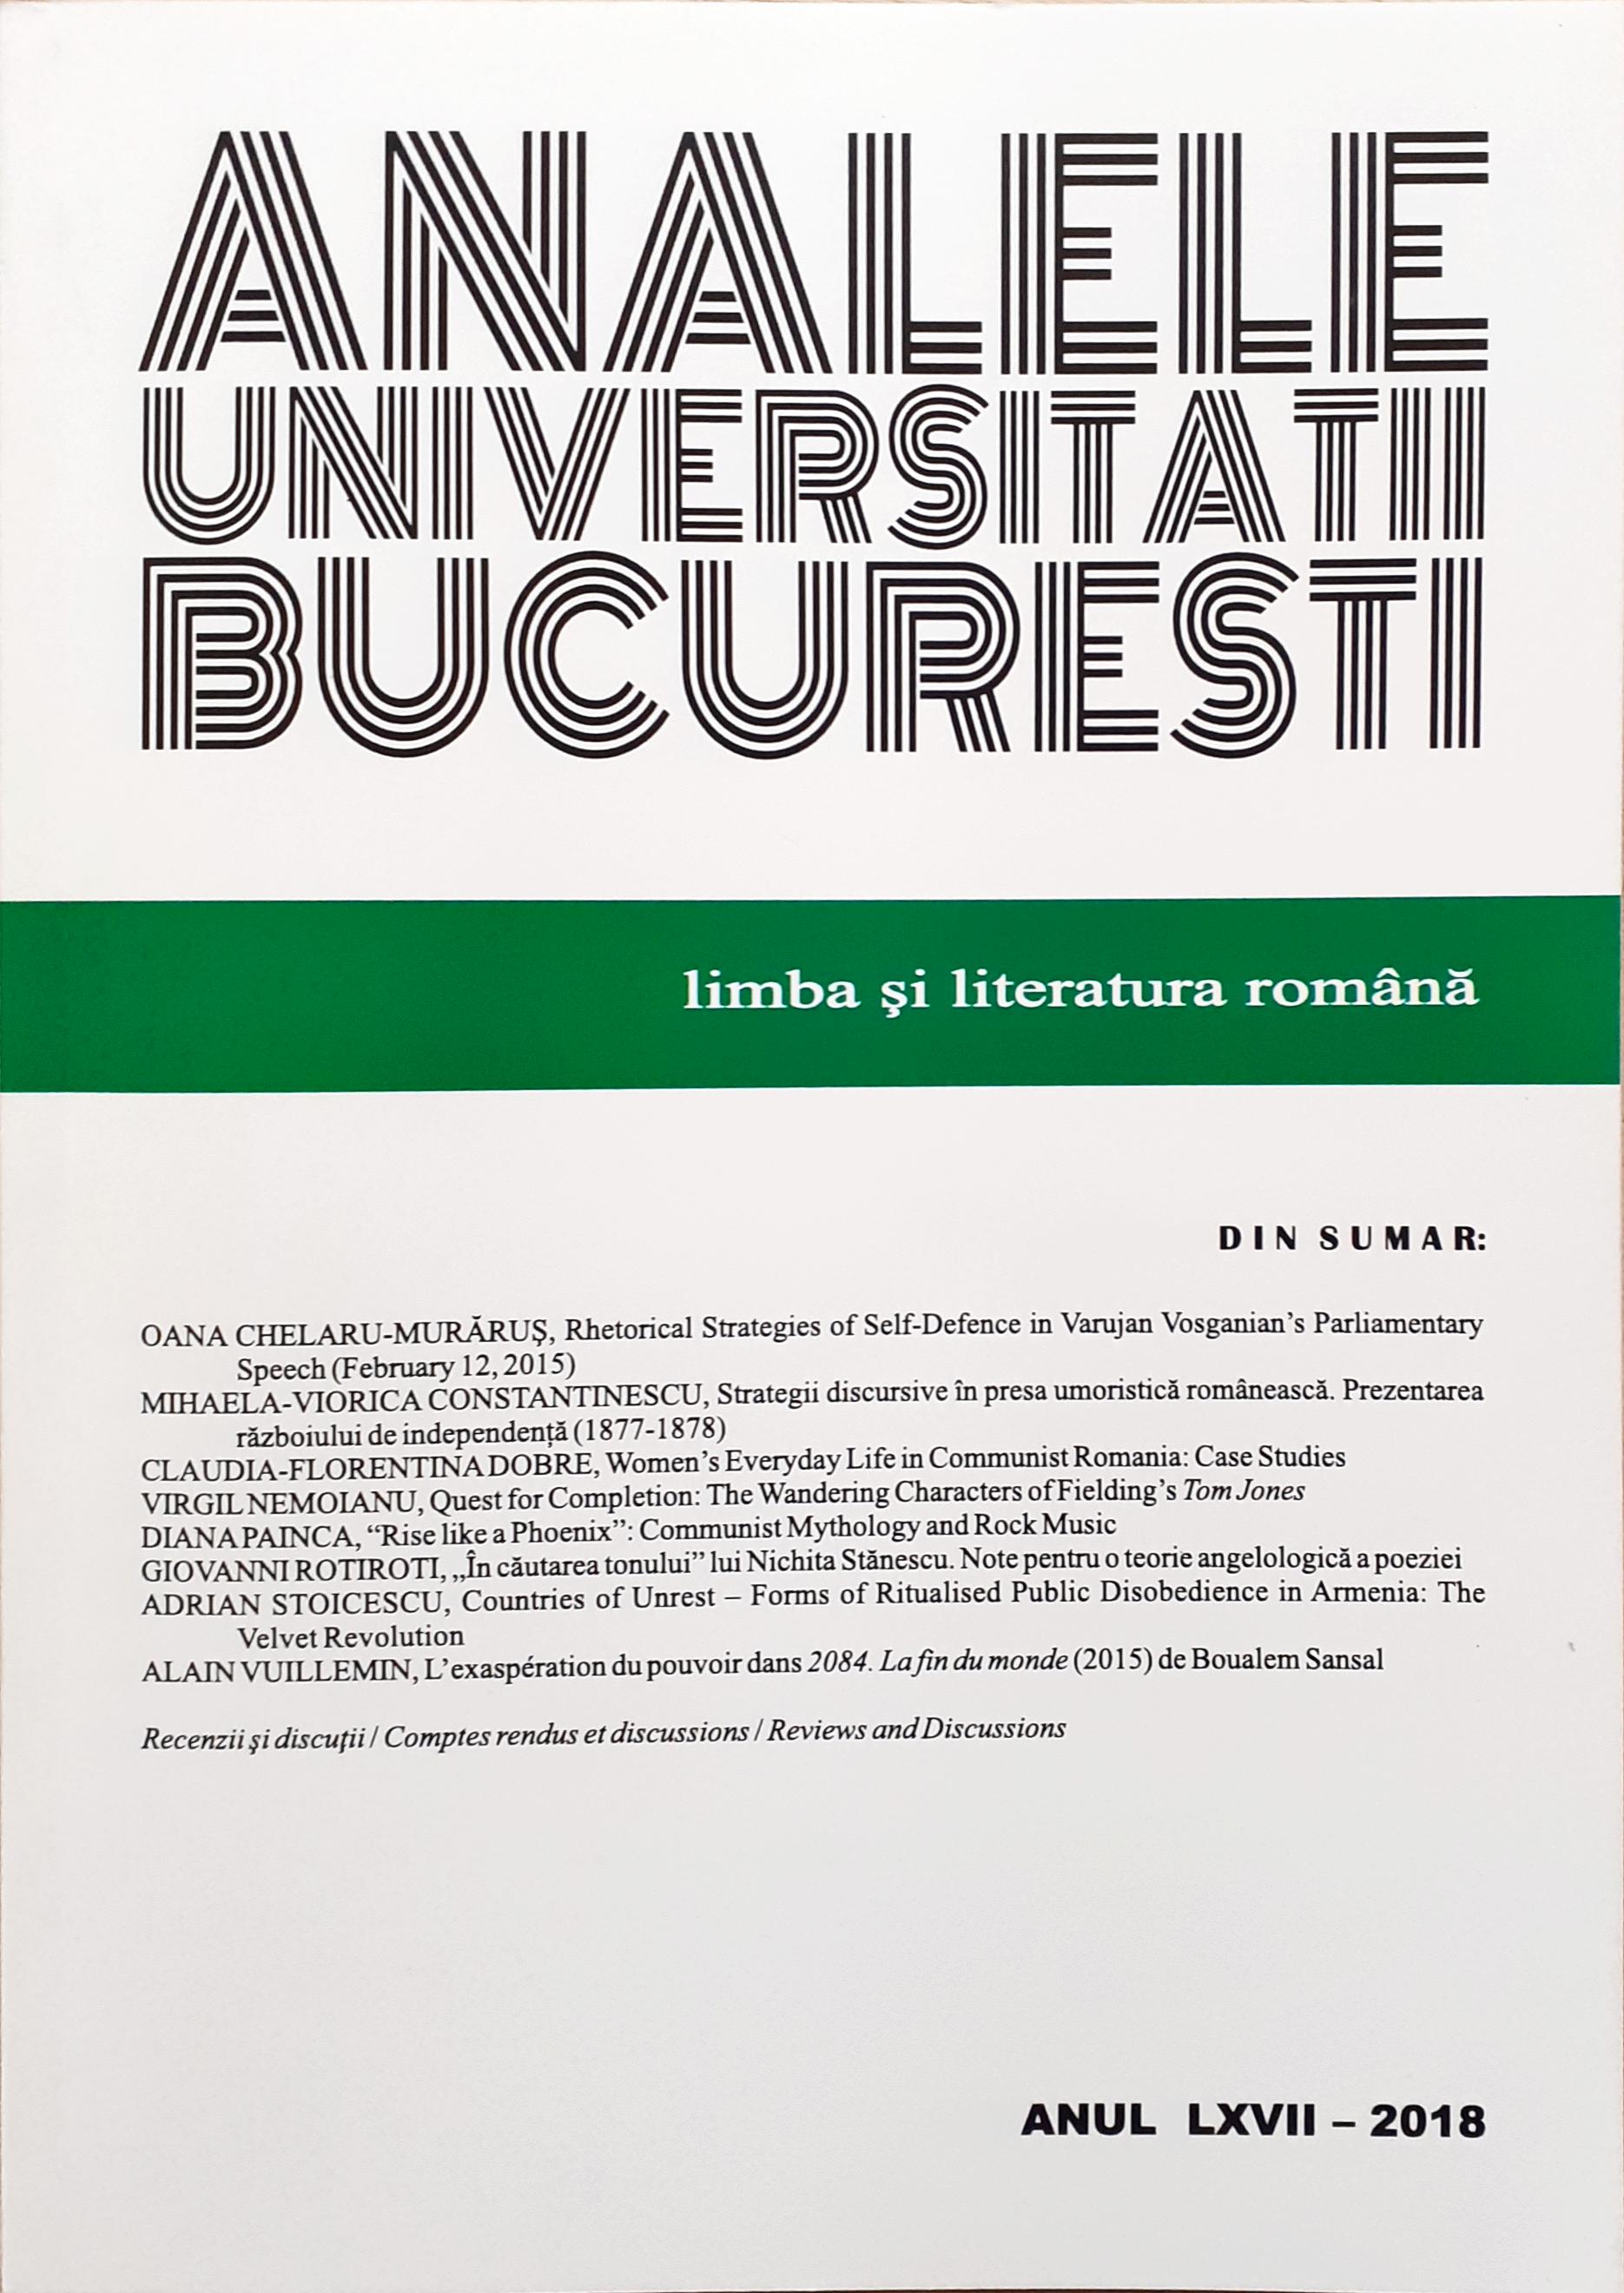 Discursive Strategies in the Romanian Humoristic Press. Presenting the Independence War (1877-1878) Cover Image